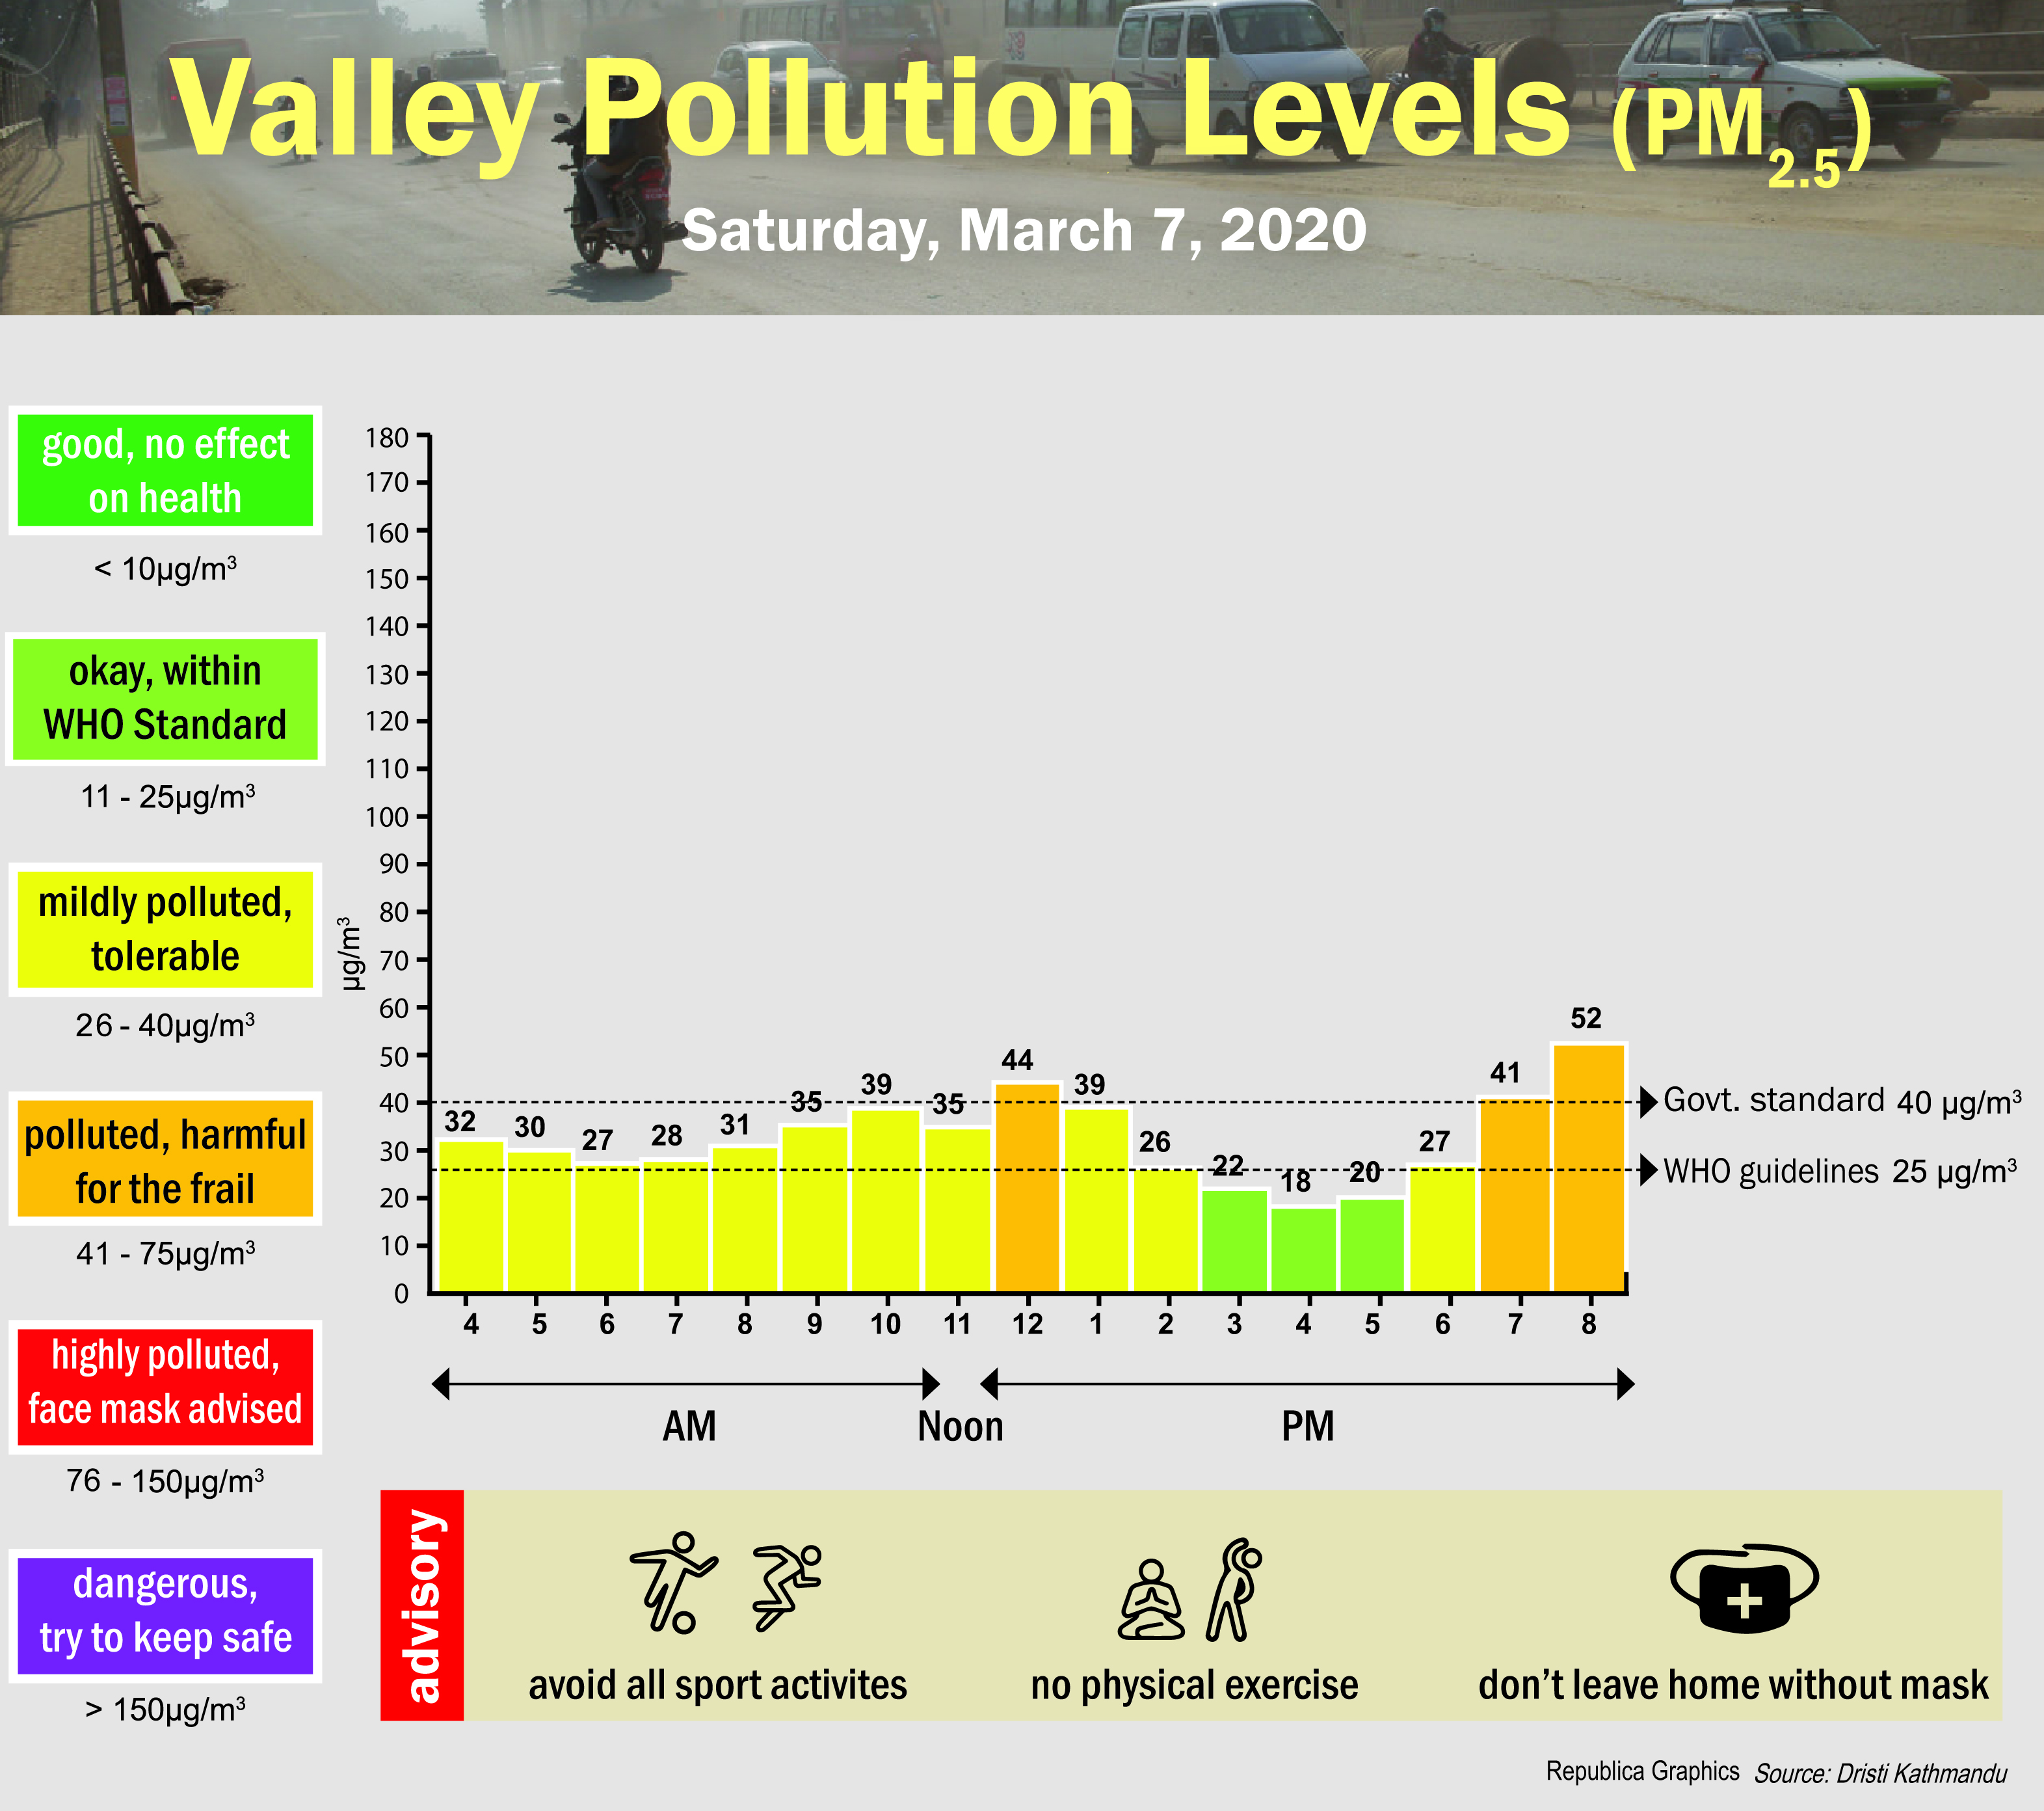 Valley Pollution Index for March 7, 2020